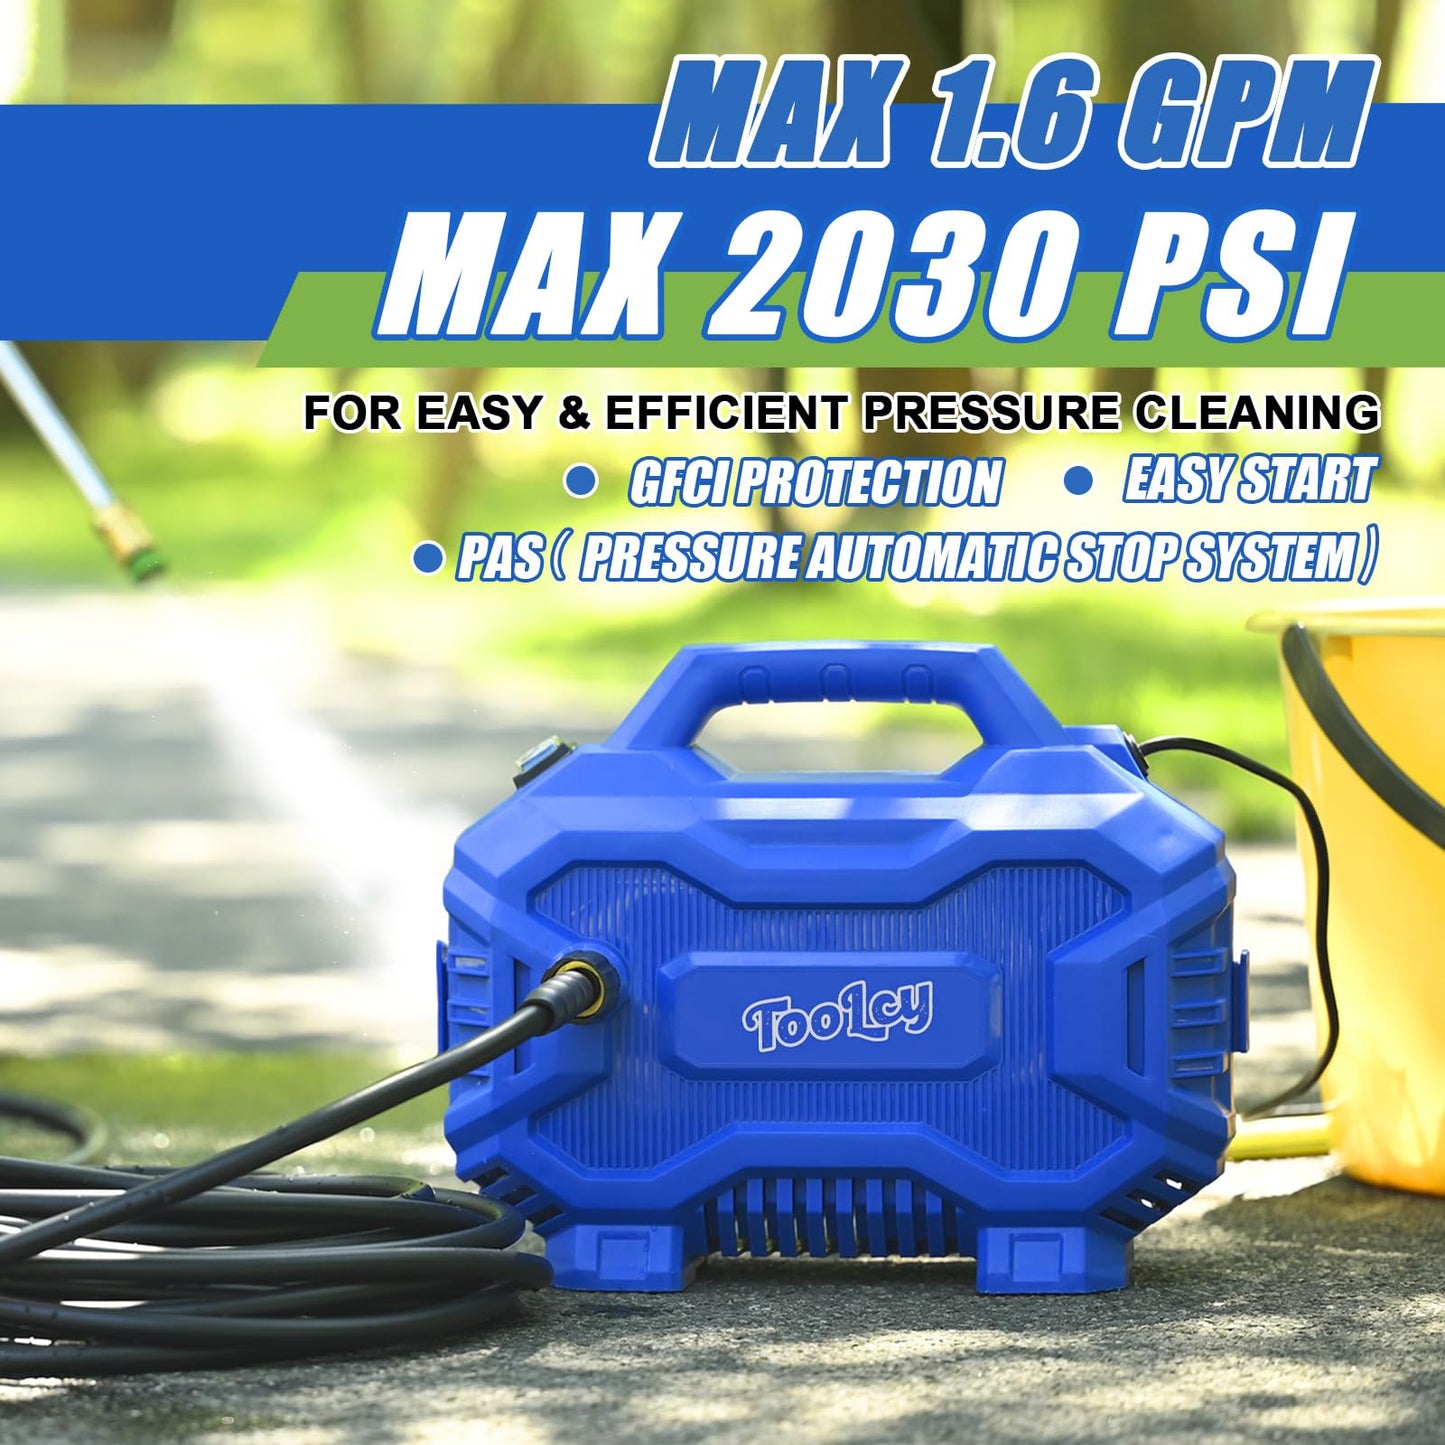 Car Pressure Washer Max 2030 PSI, Small Electric Power Washer, 50 FT Pressure Hose, Short Foam Gun with Adjustable Wand, 5 Nozzle Tips, Great to Wash Cars, RVs, Patios, Fences (V 3.0)